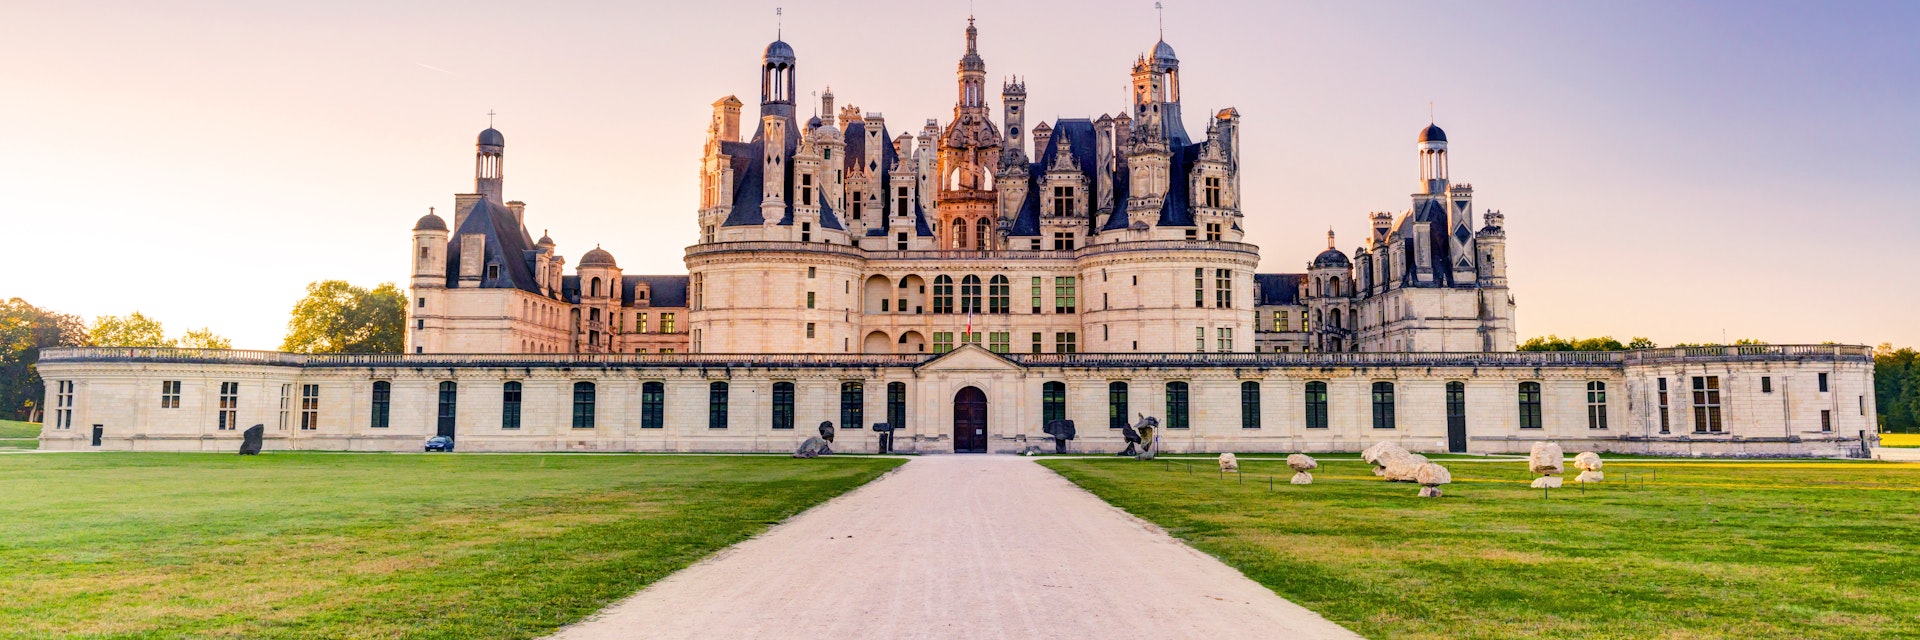 The royal Chateau de Chambord in the evening, France. This castle is located in the Loire Valley, was built in the 16th century and is one of the most recognizable chateaux in the world.